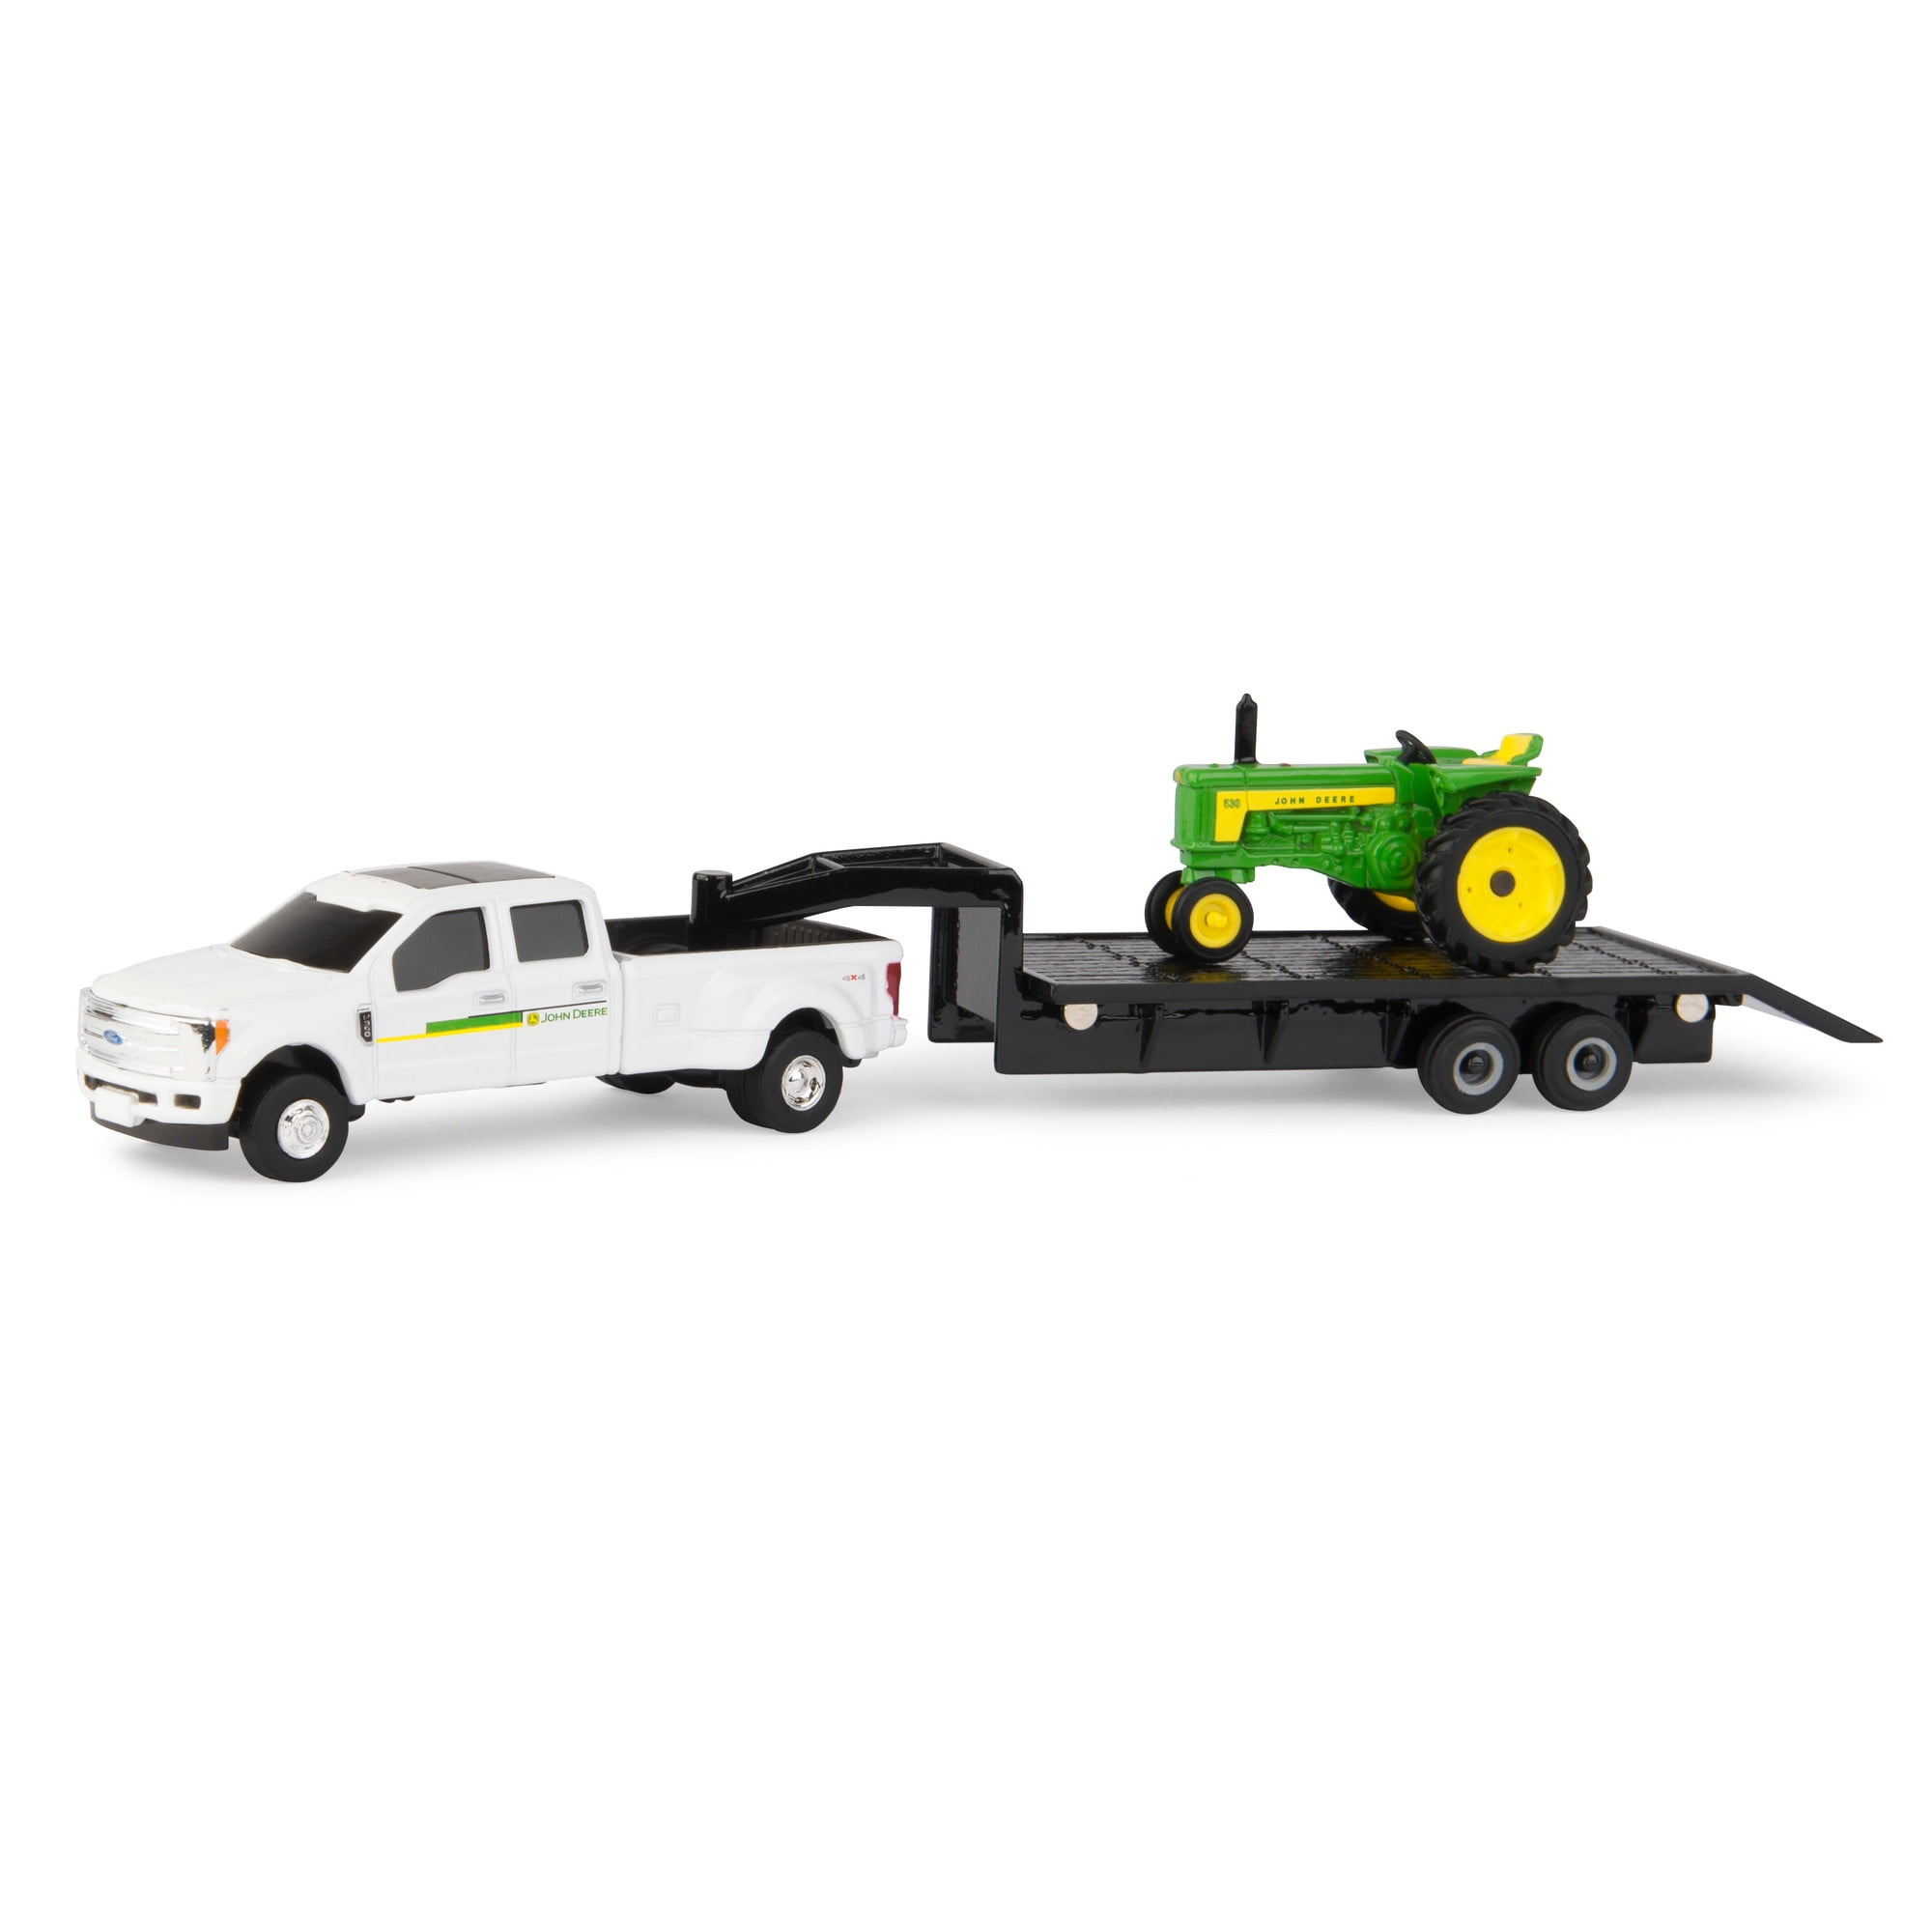 1/64 Agriculture Layout # John Deere 530 Tractor & Trailer Set Farm Toy